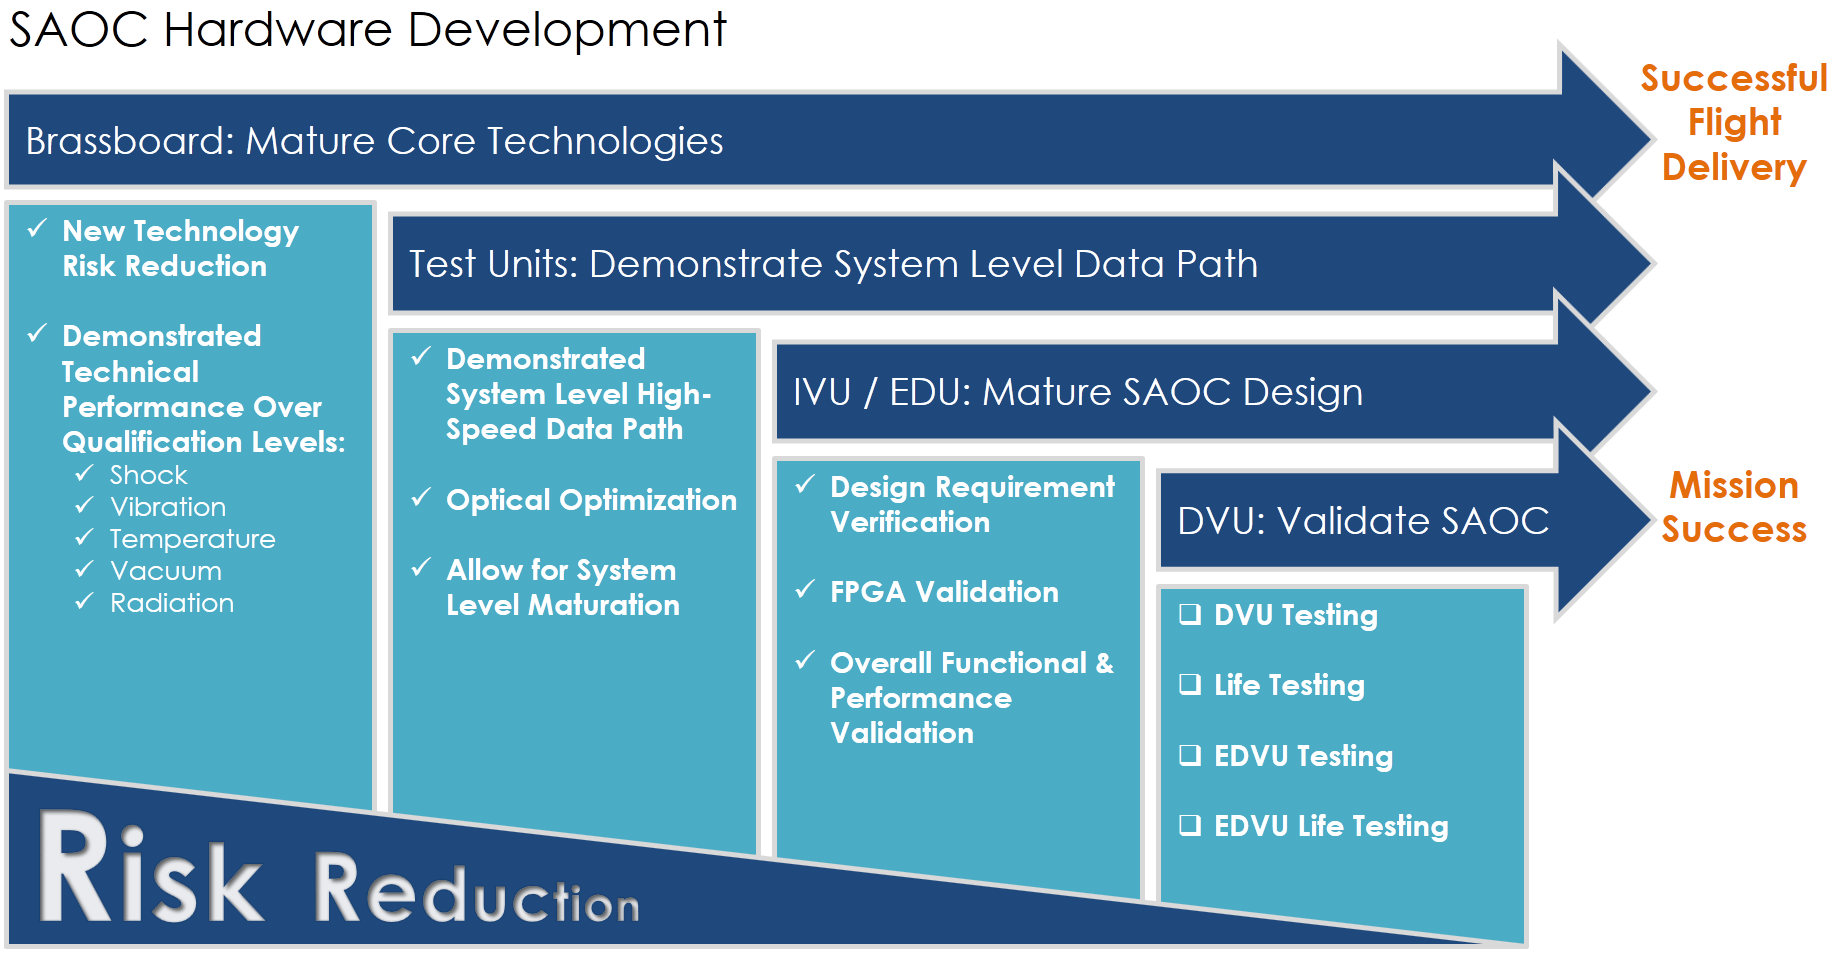 Figure 4: AirBorn's SAOC® hardware development process consisted of extensive analysis and testing to reduce risk and maximize reliability. Source: AirBorn